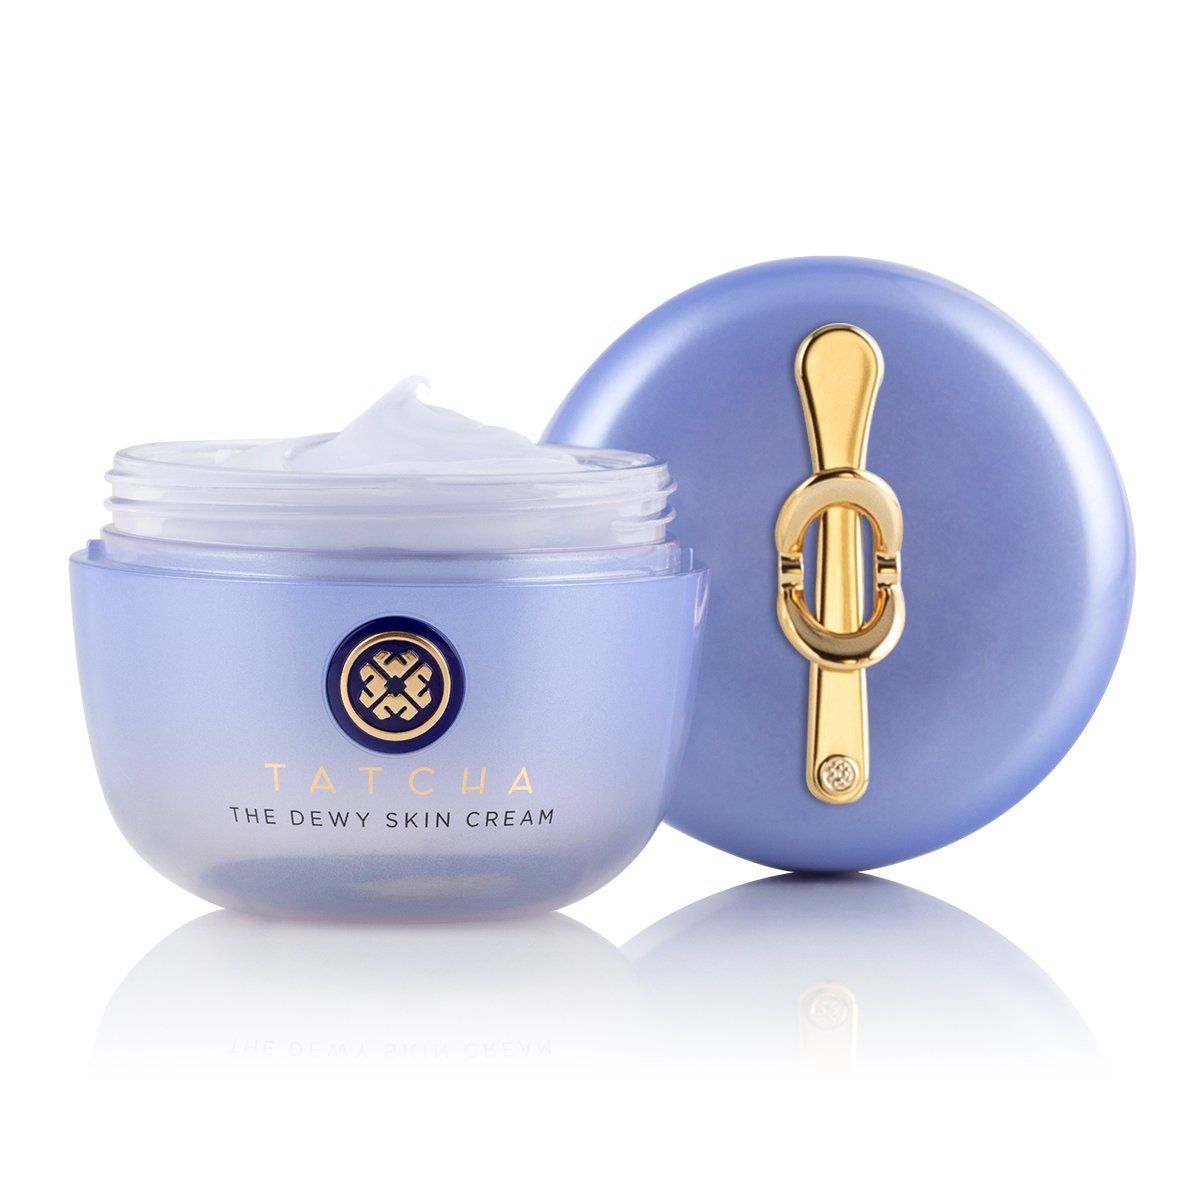 Limited-edition value size of The Dewy Skin Cream, a rich moisturizer that feeds skin with plumpi... | Tatcha